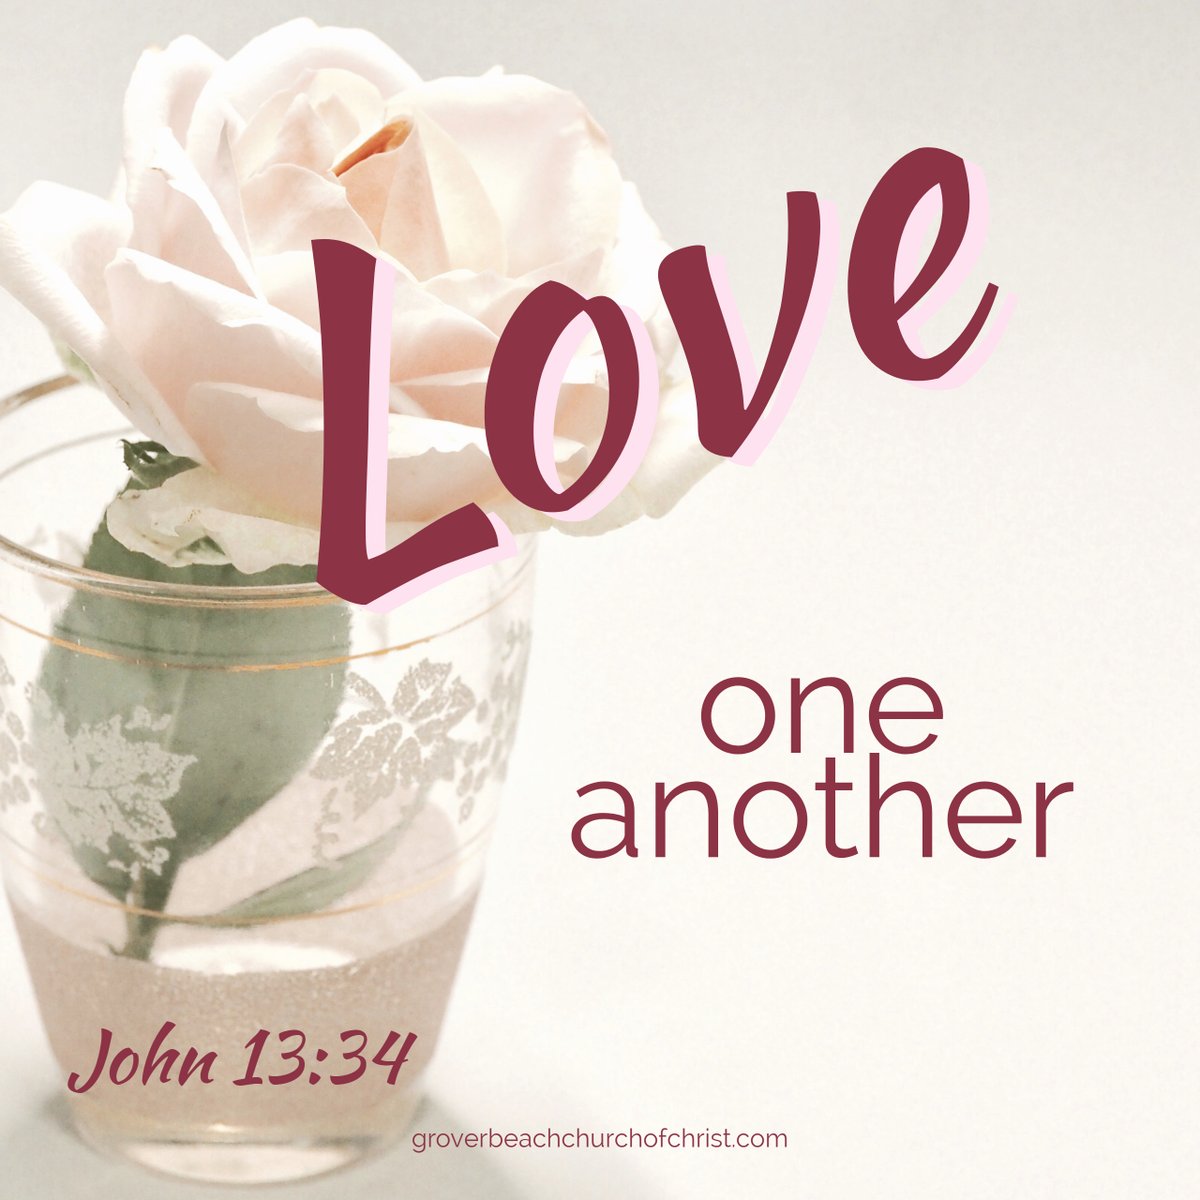 A new commandment I give to you, that you love one another: just as I have loved you, you also are to love one another. John 13:34

@Carole77777 @Stewart7Donna @Raywhee87822320   @JW_Branding @DulleyTopBooks @Revivenw2019 @Duckhuntinggrl